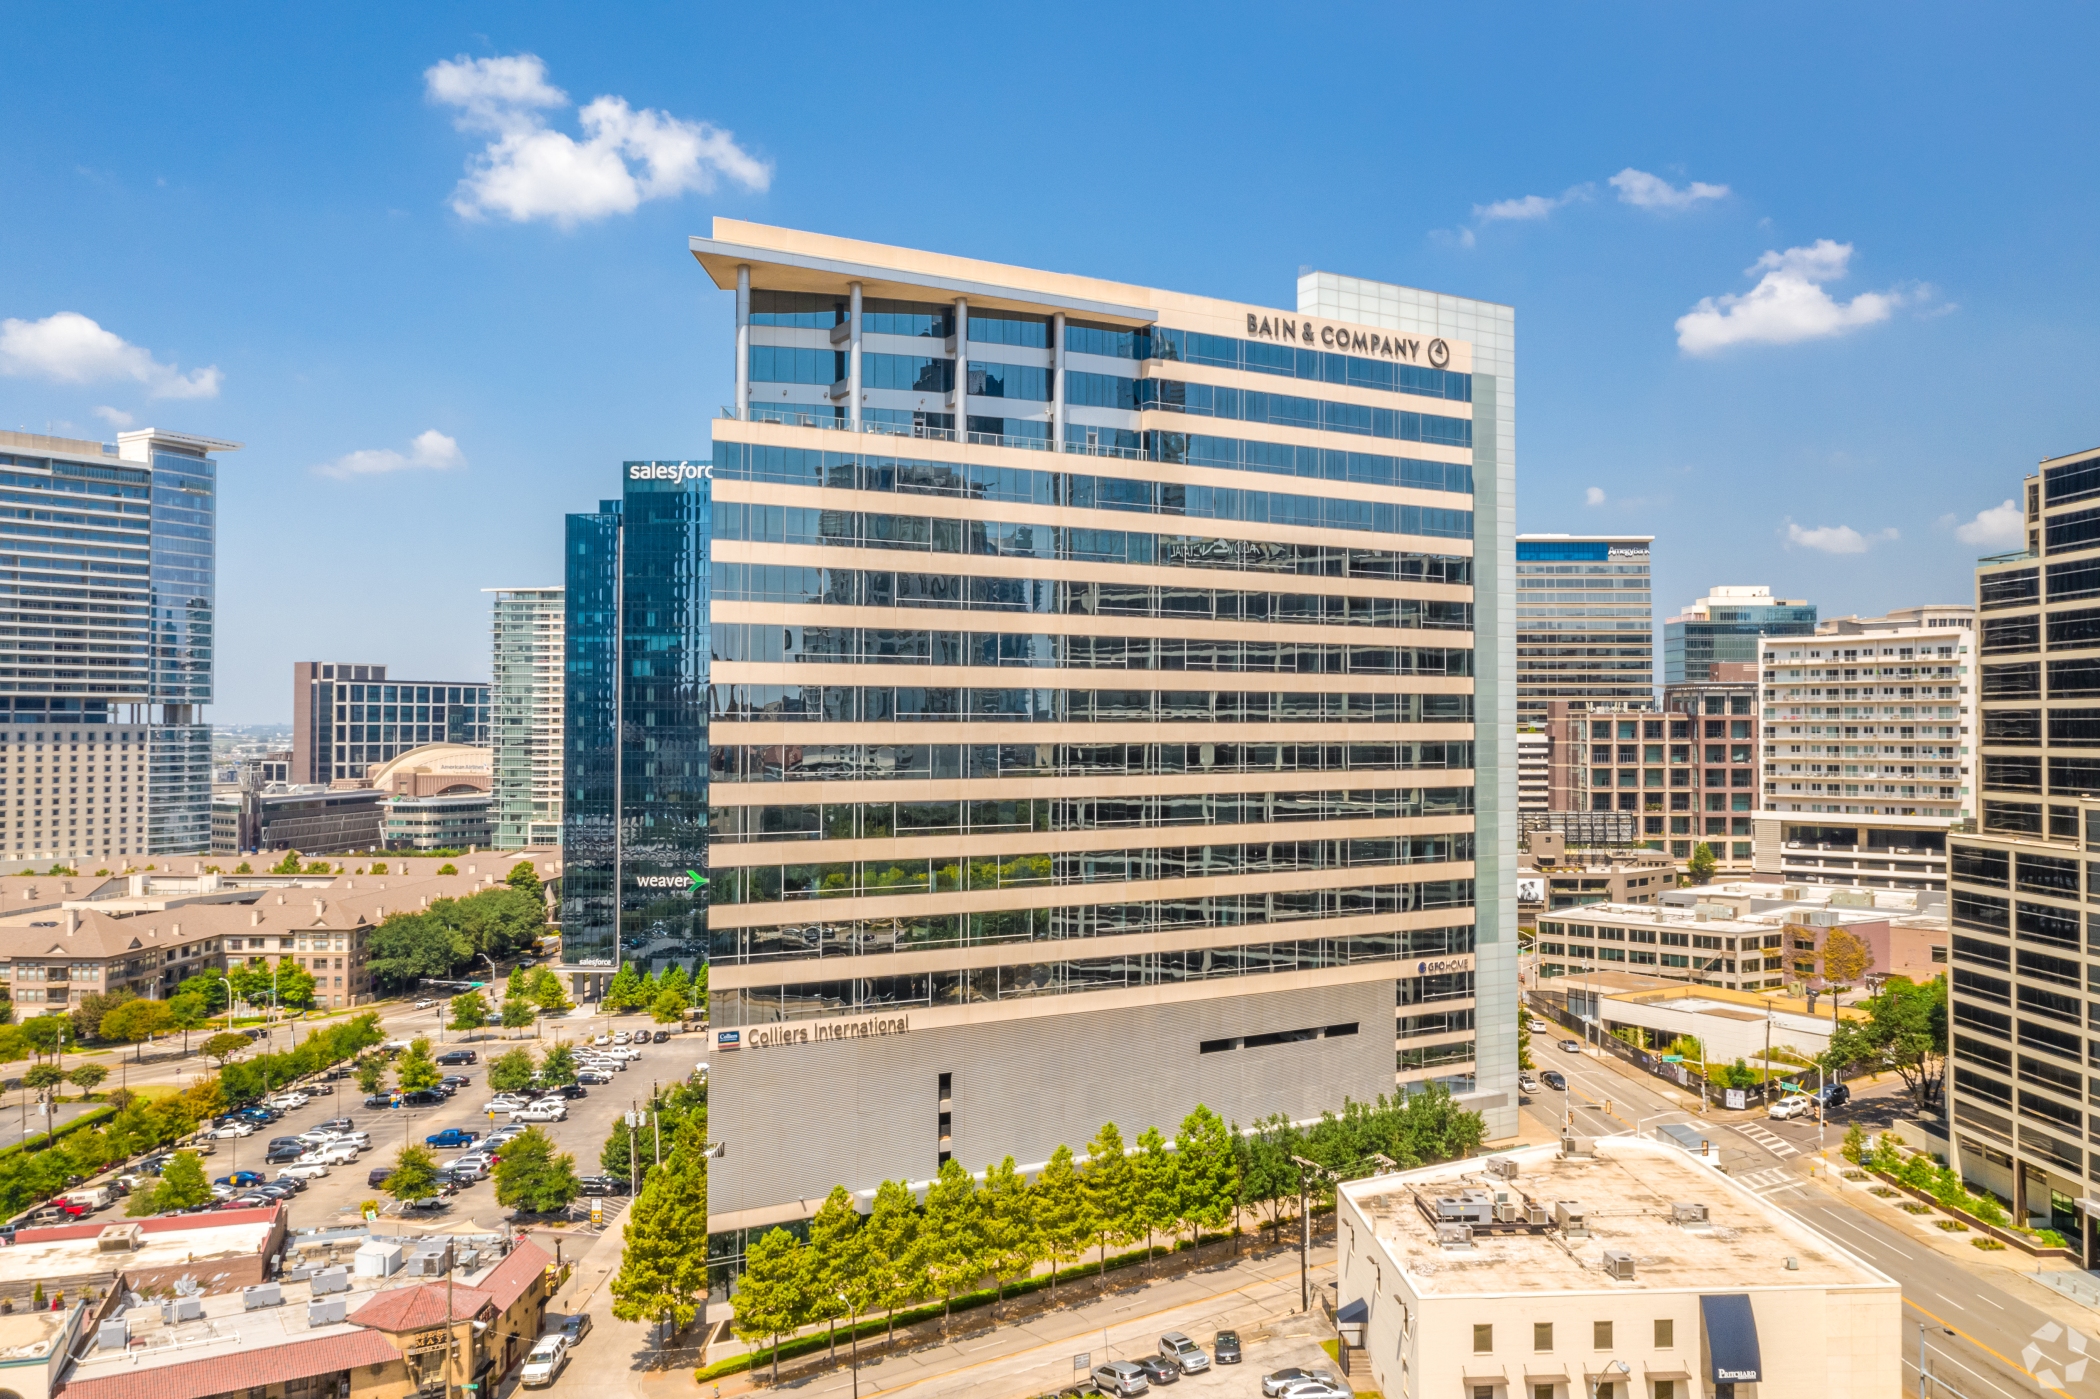 A California-based homebuilder is moving its corporate headquarters to this building in Uptown Dallas. (CoStar)